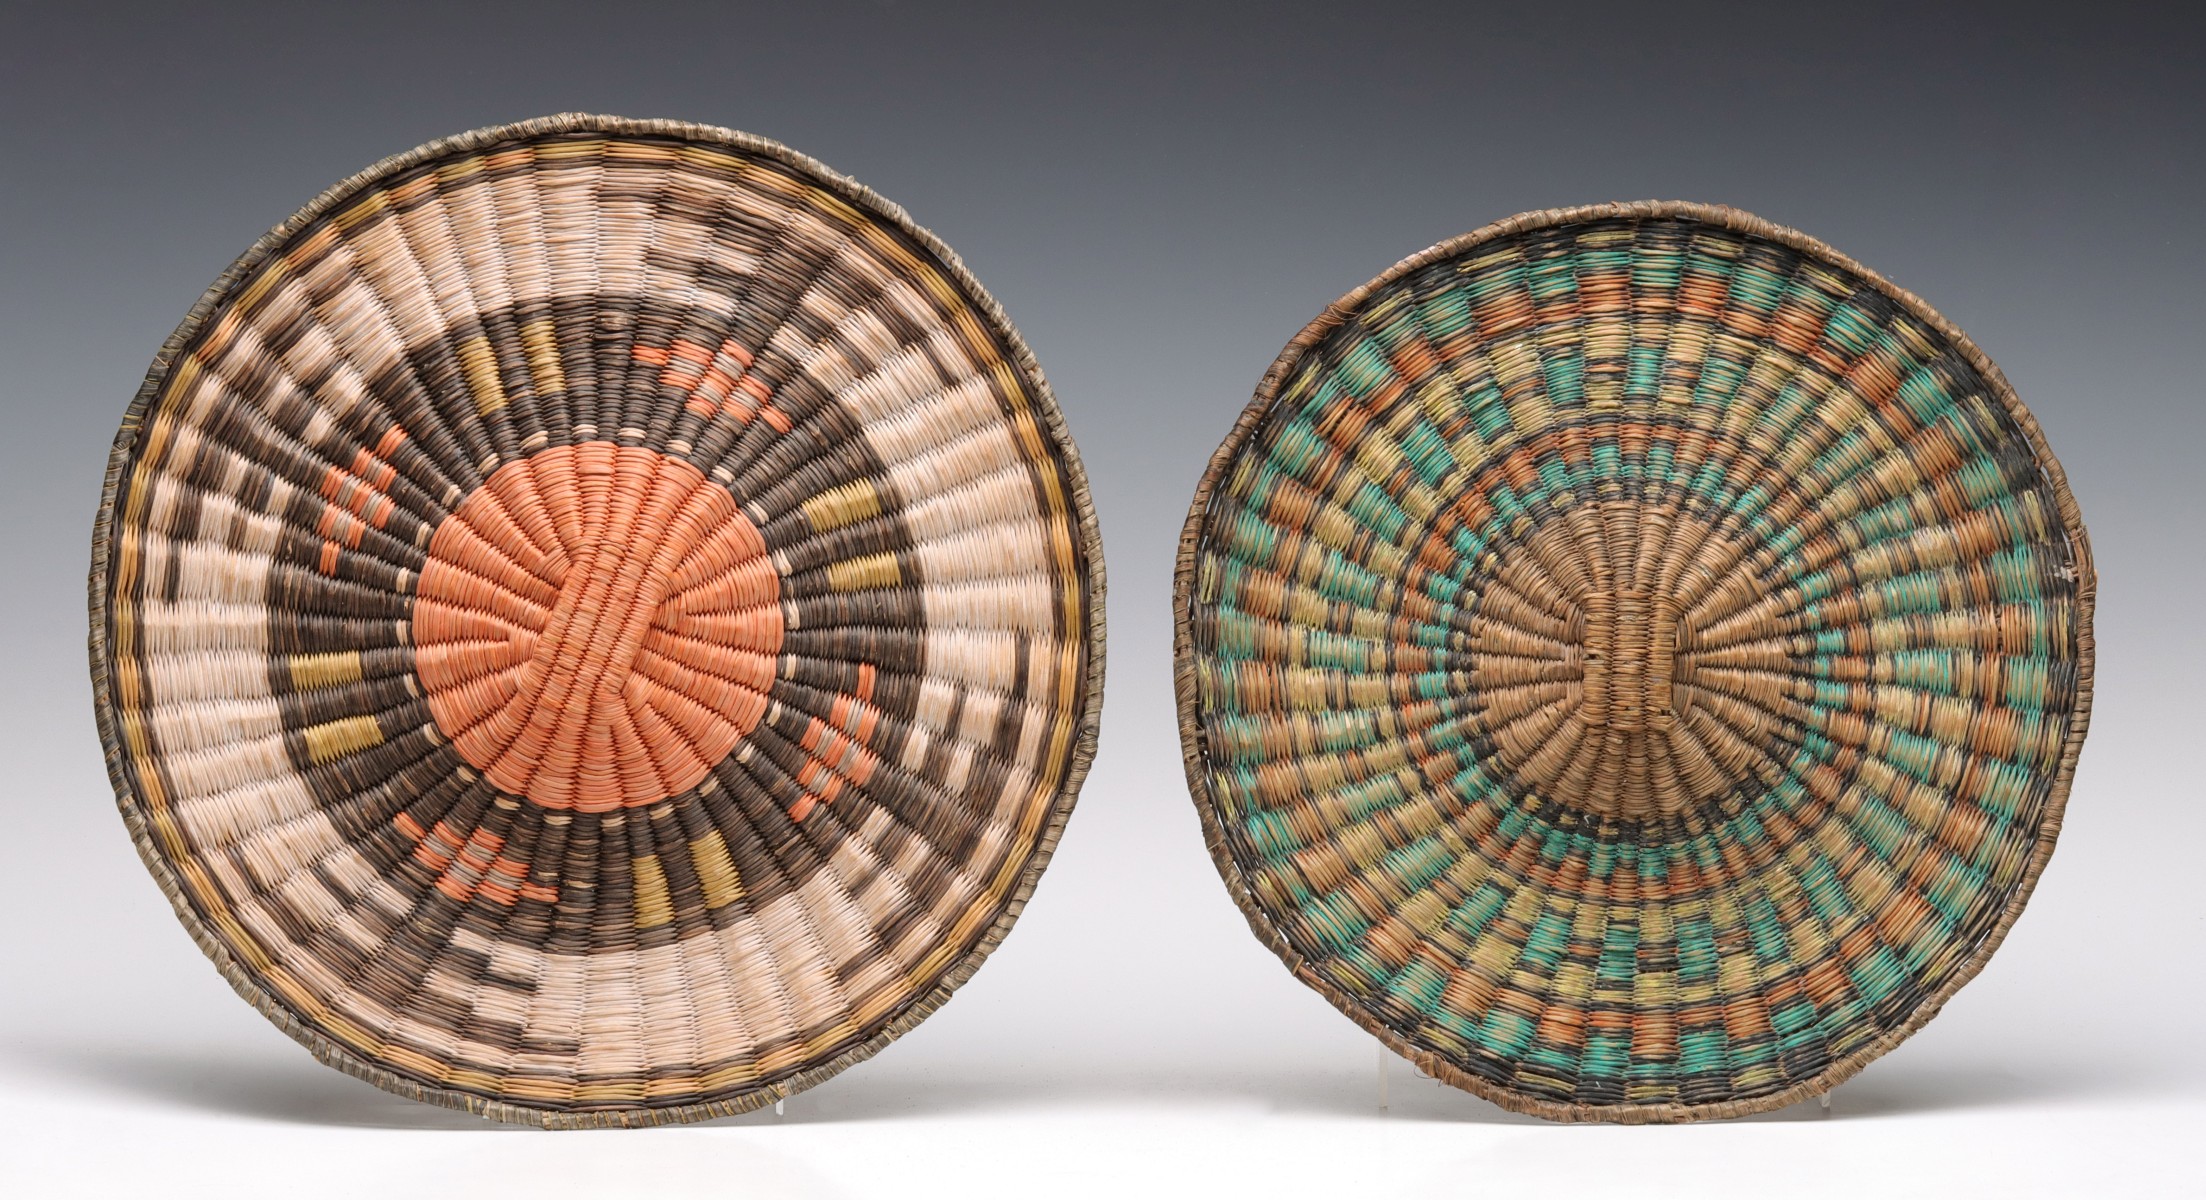 TWO GOOD BRIGHTLY COLORED HOPI WICKER BASKETRY PLAQUES